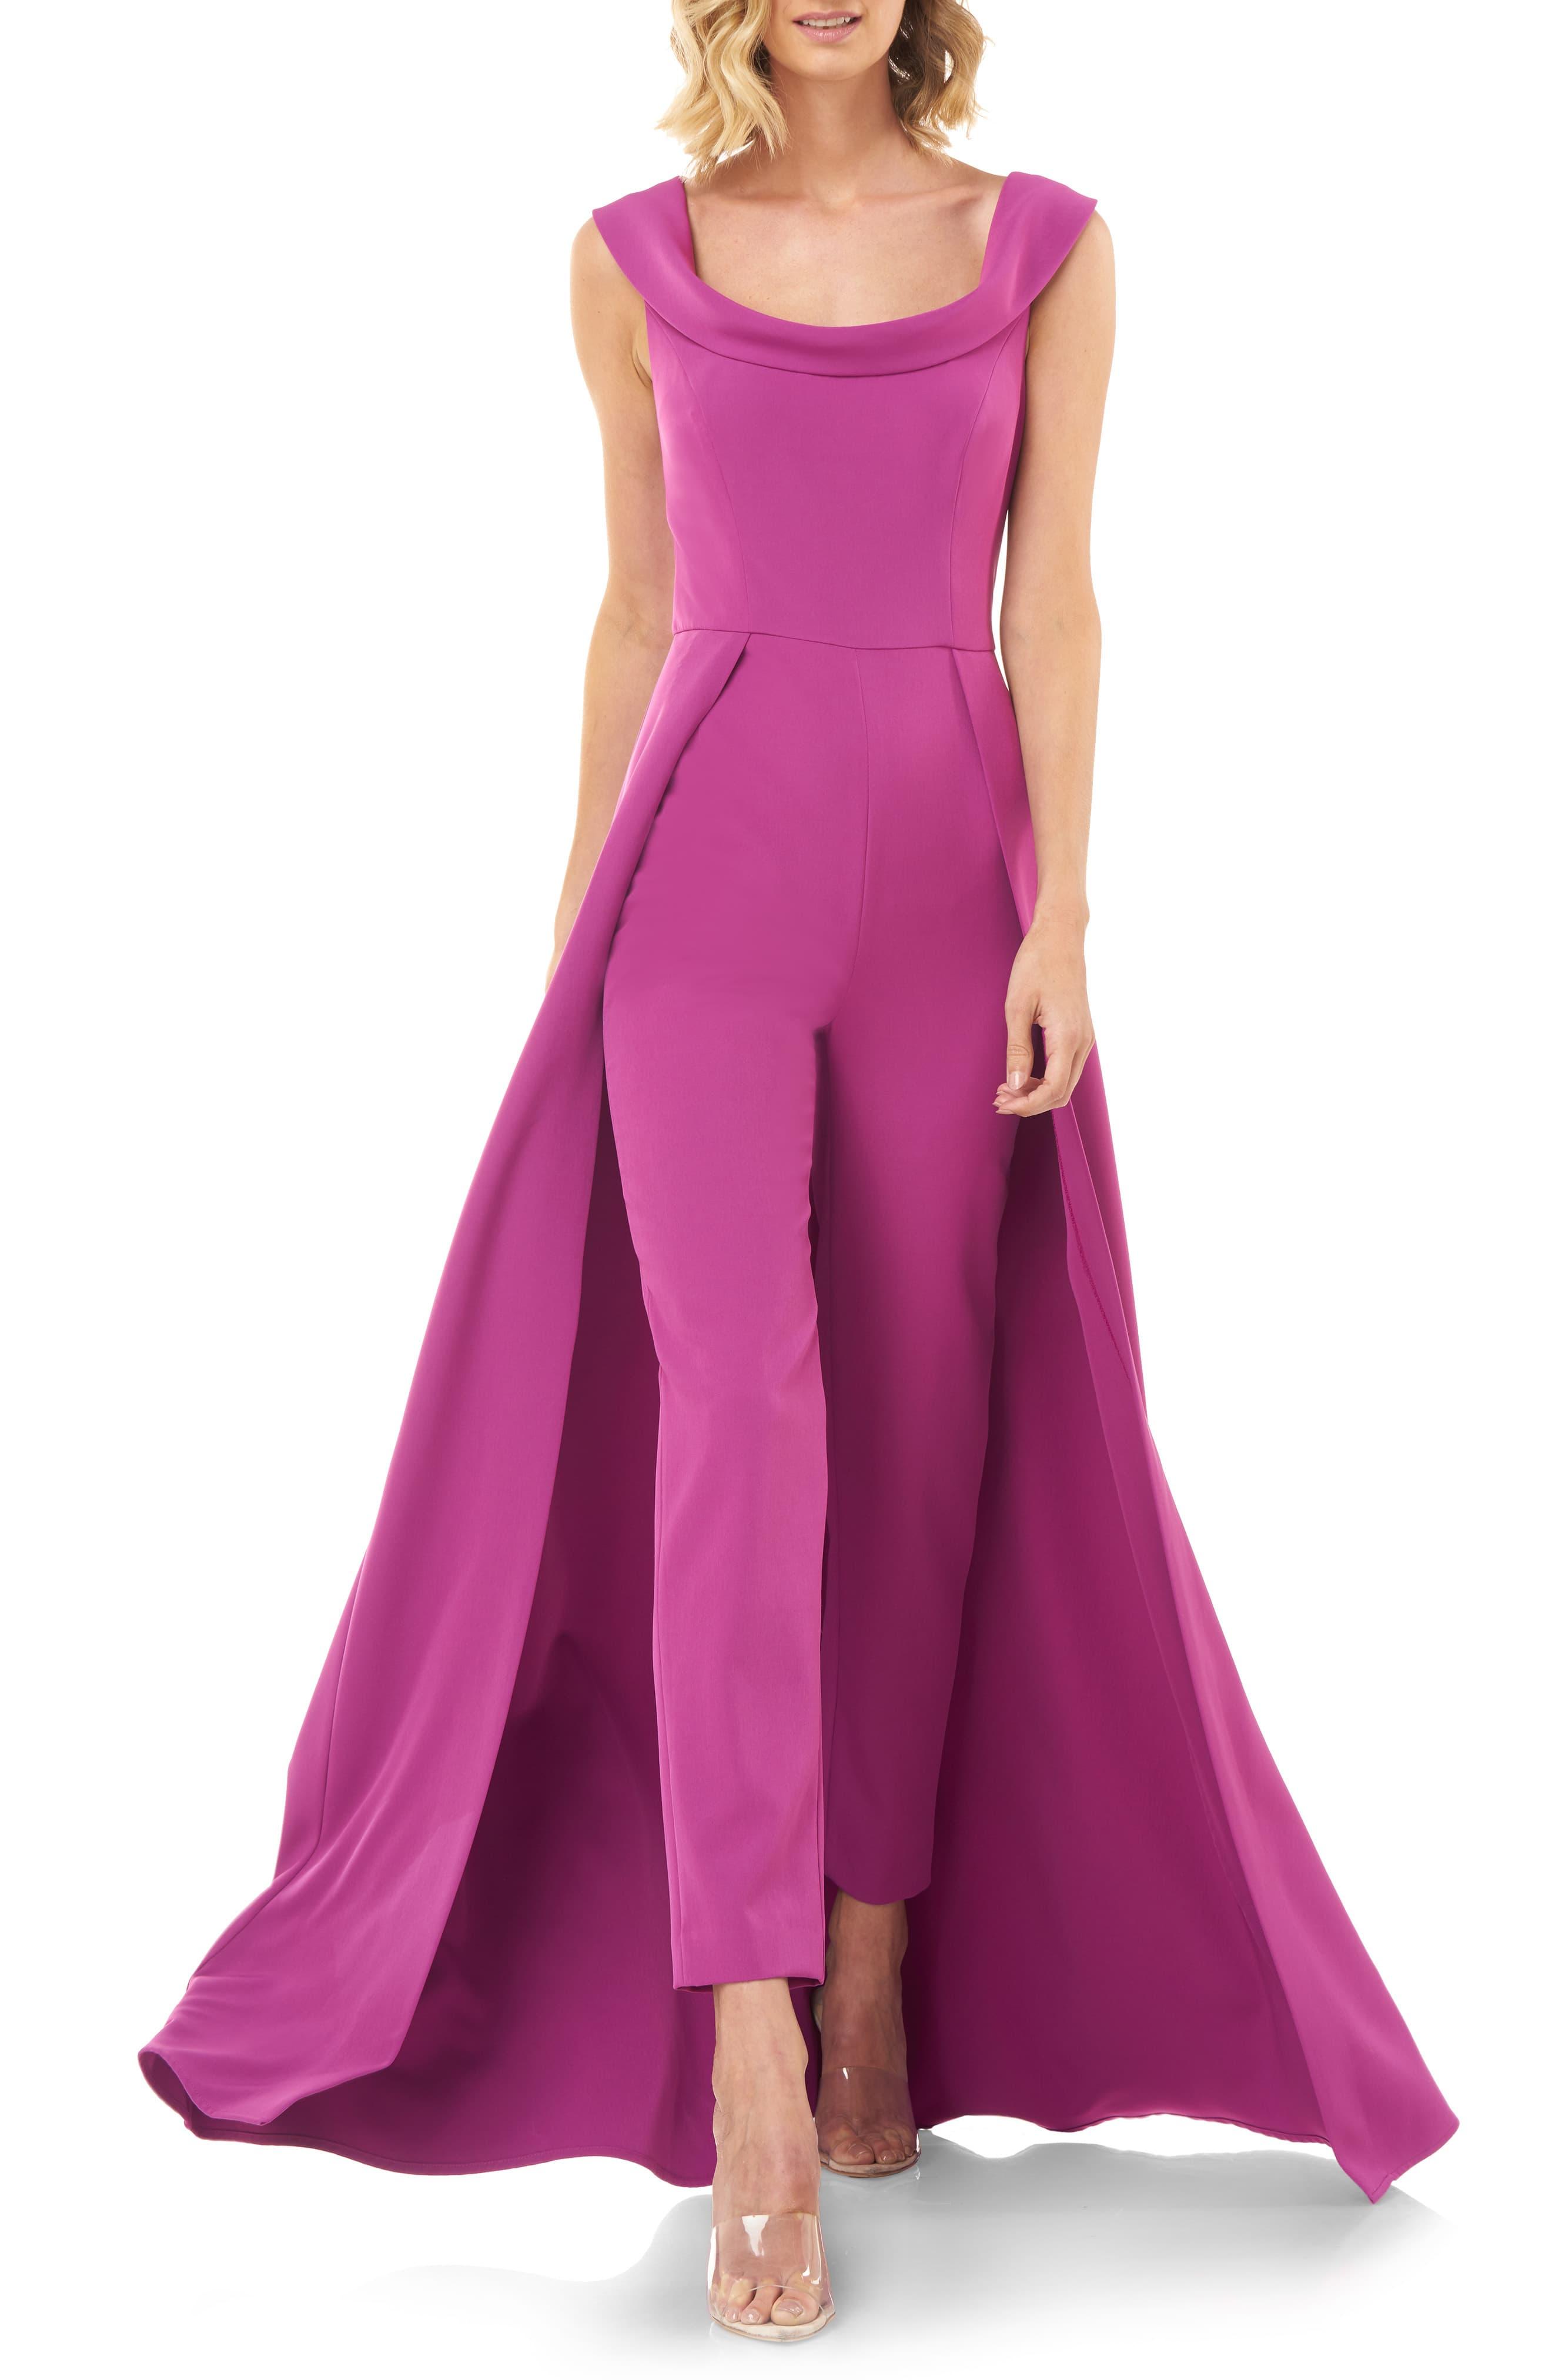 Kay Unger Jumpsuit Gown in Cerise (Pink) - Lyst